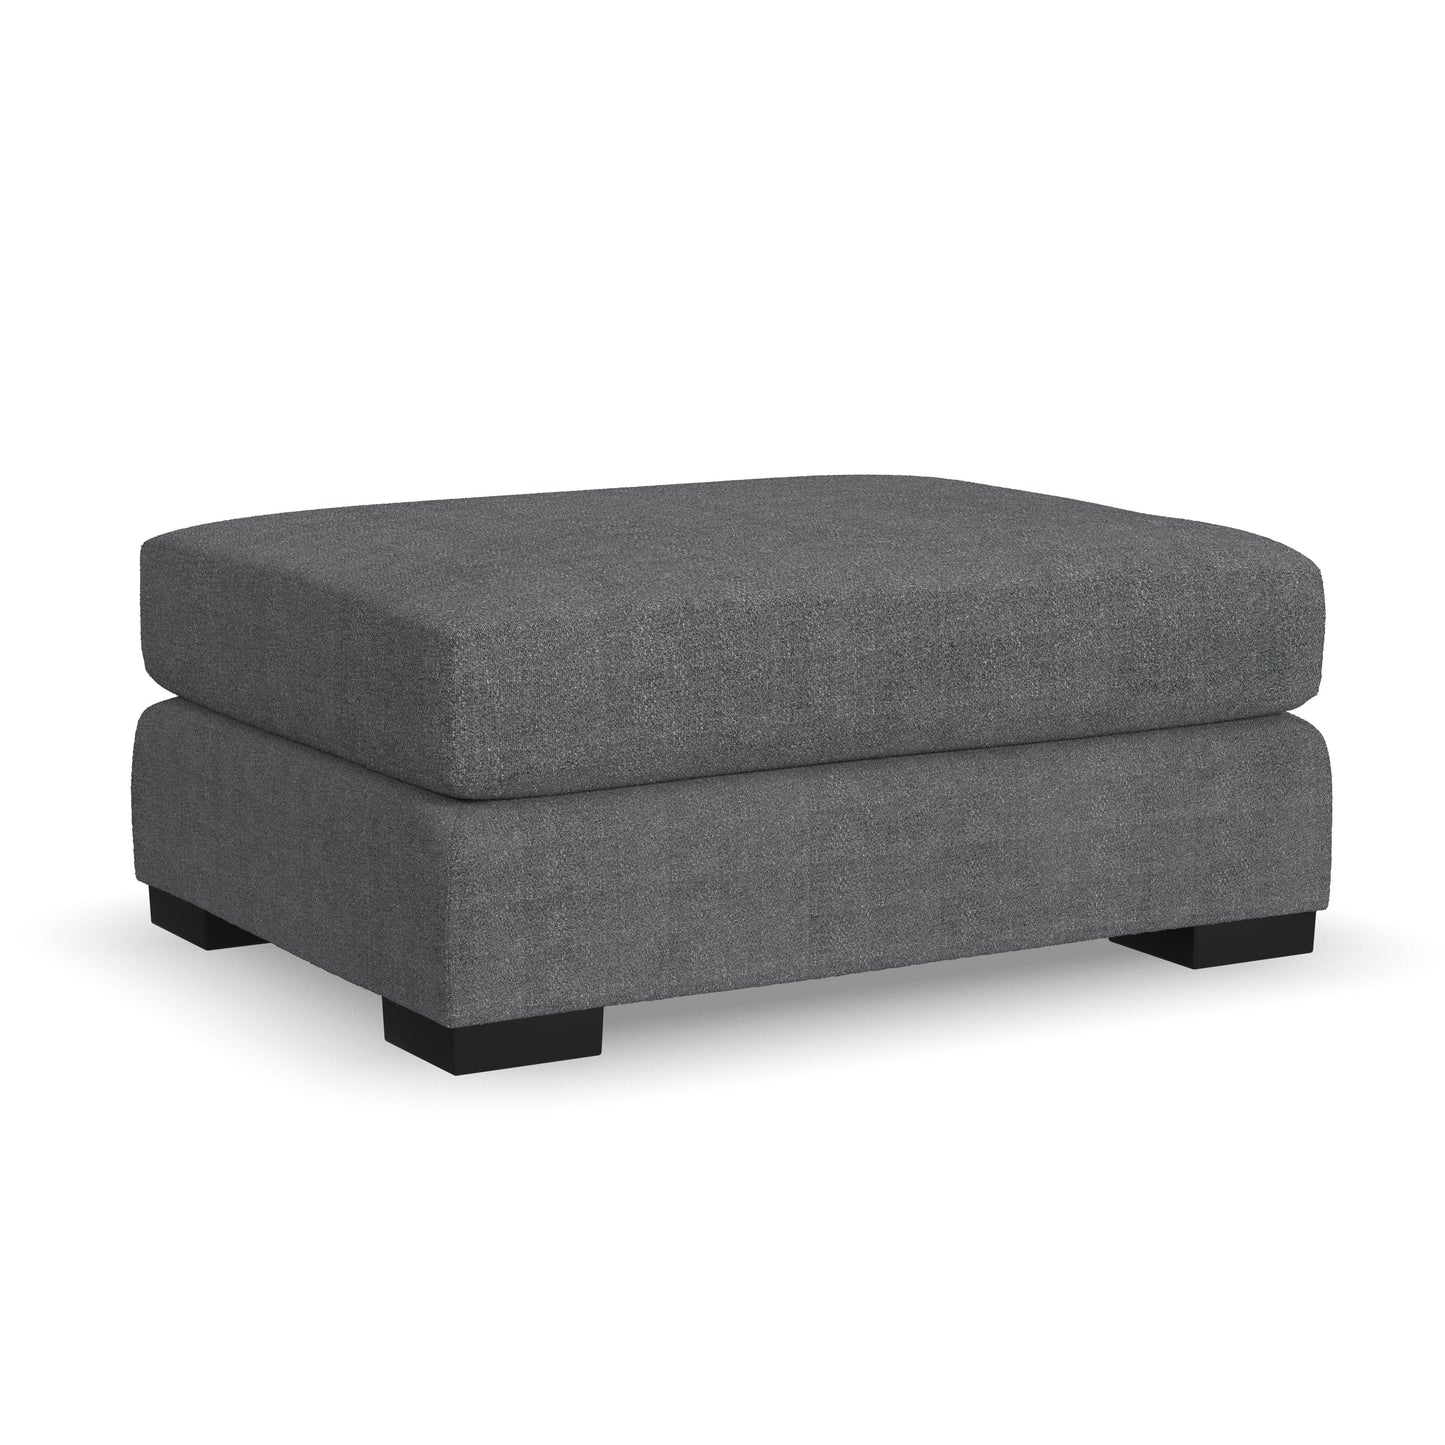 Ottoman in Chambray